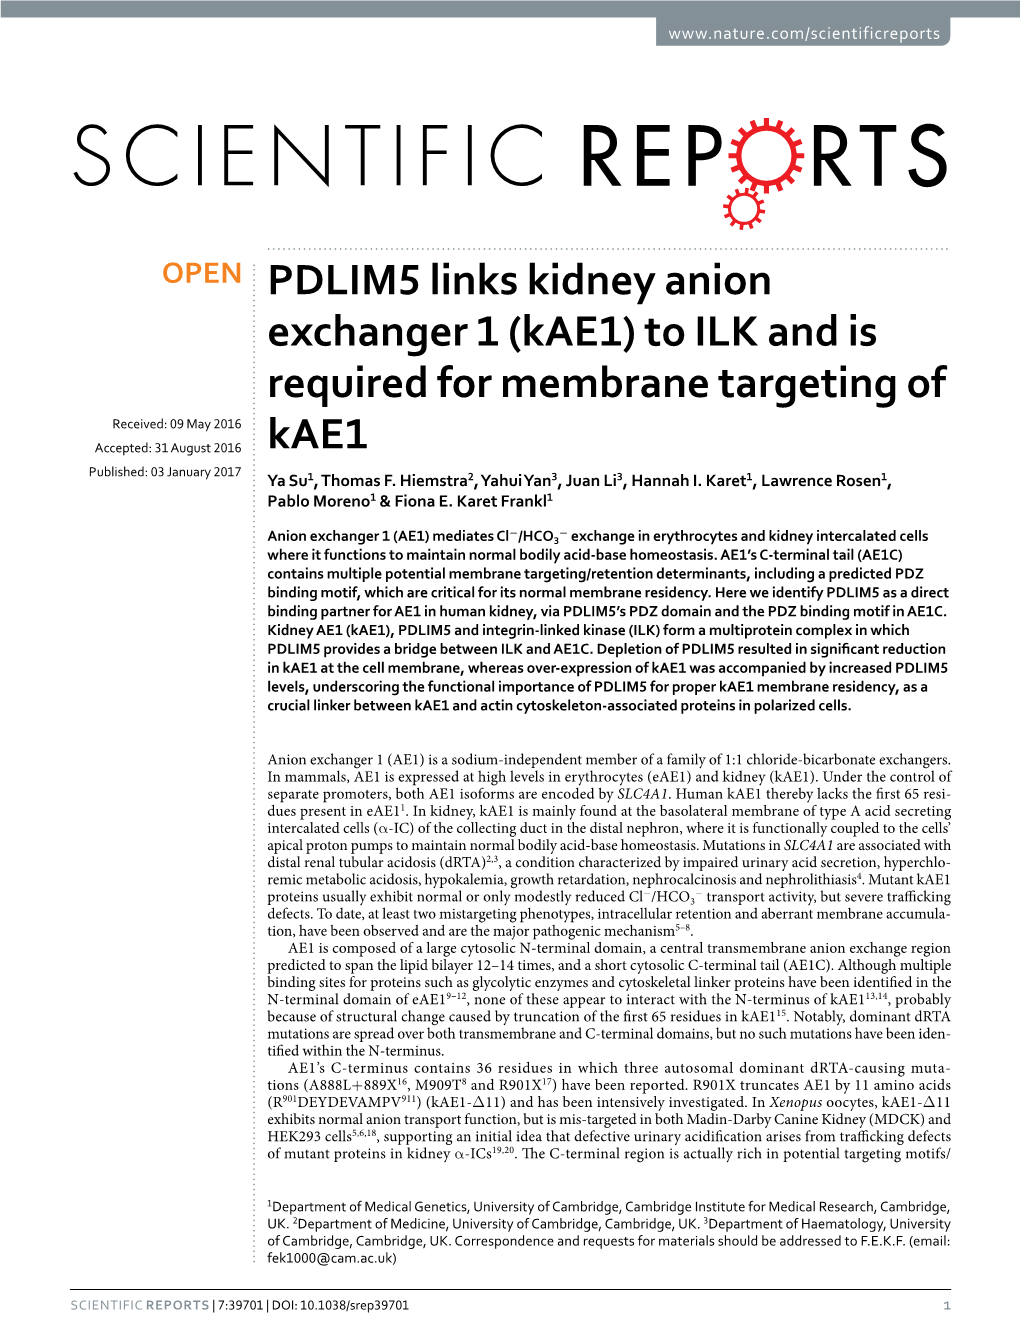 PDLIM5 Links Kidney Anion Exchanger 1 (Kae1) to ILK and Is Required For